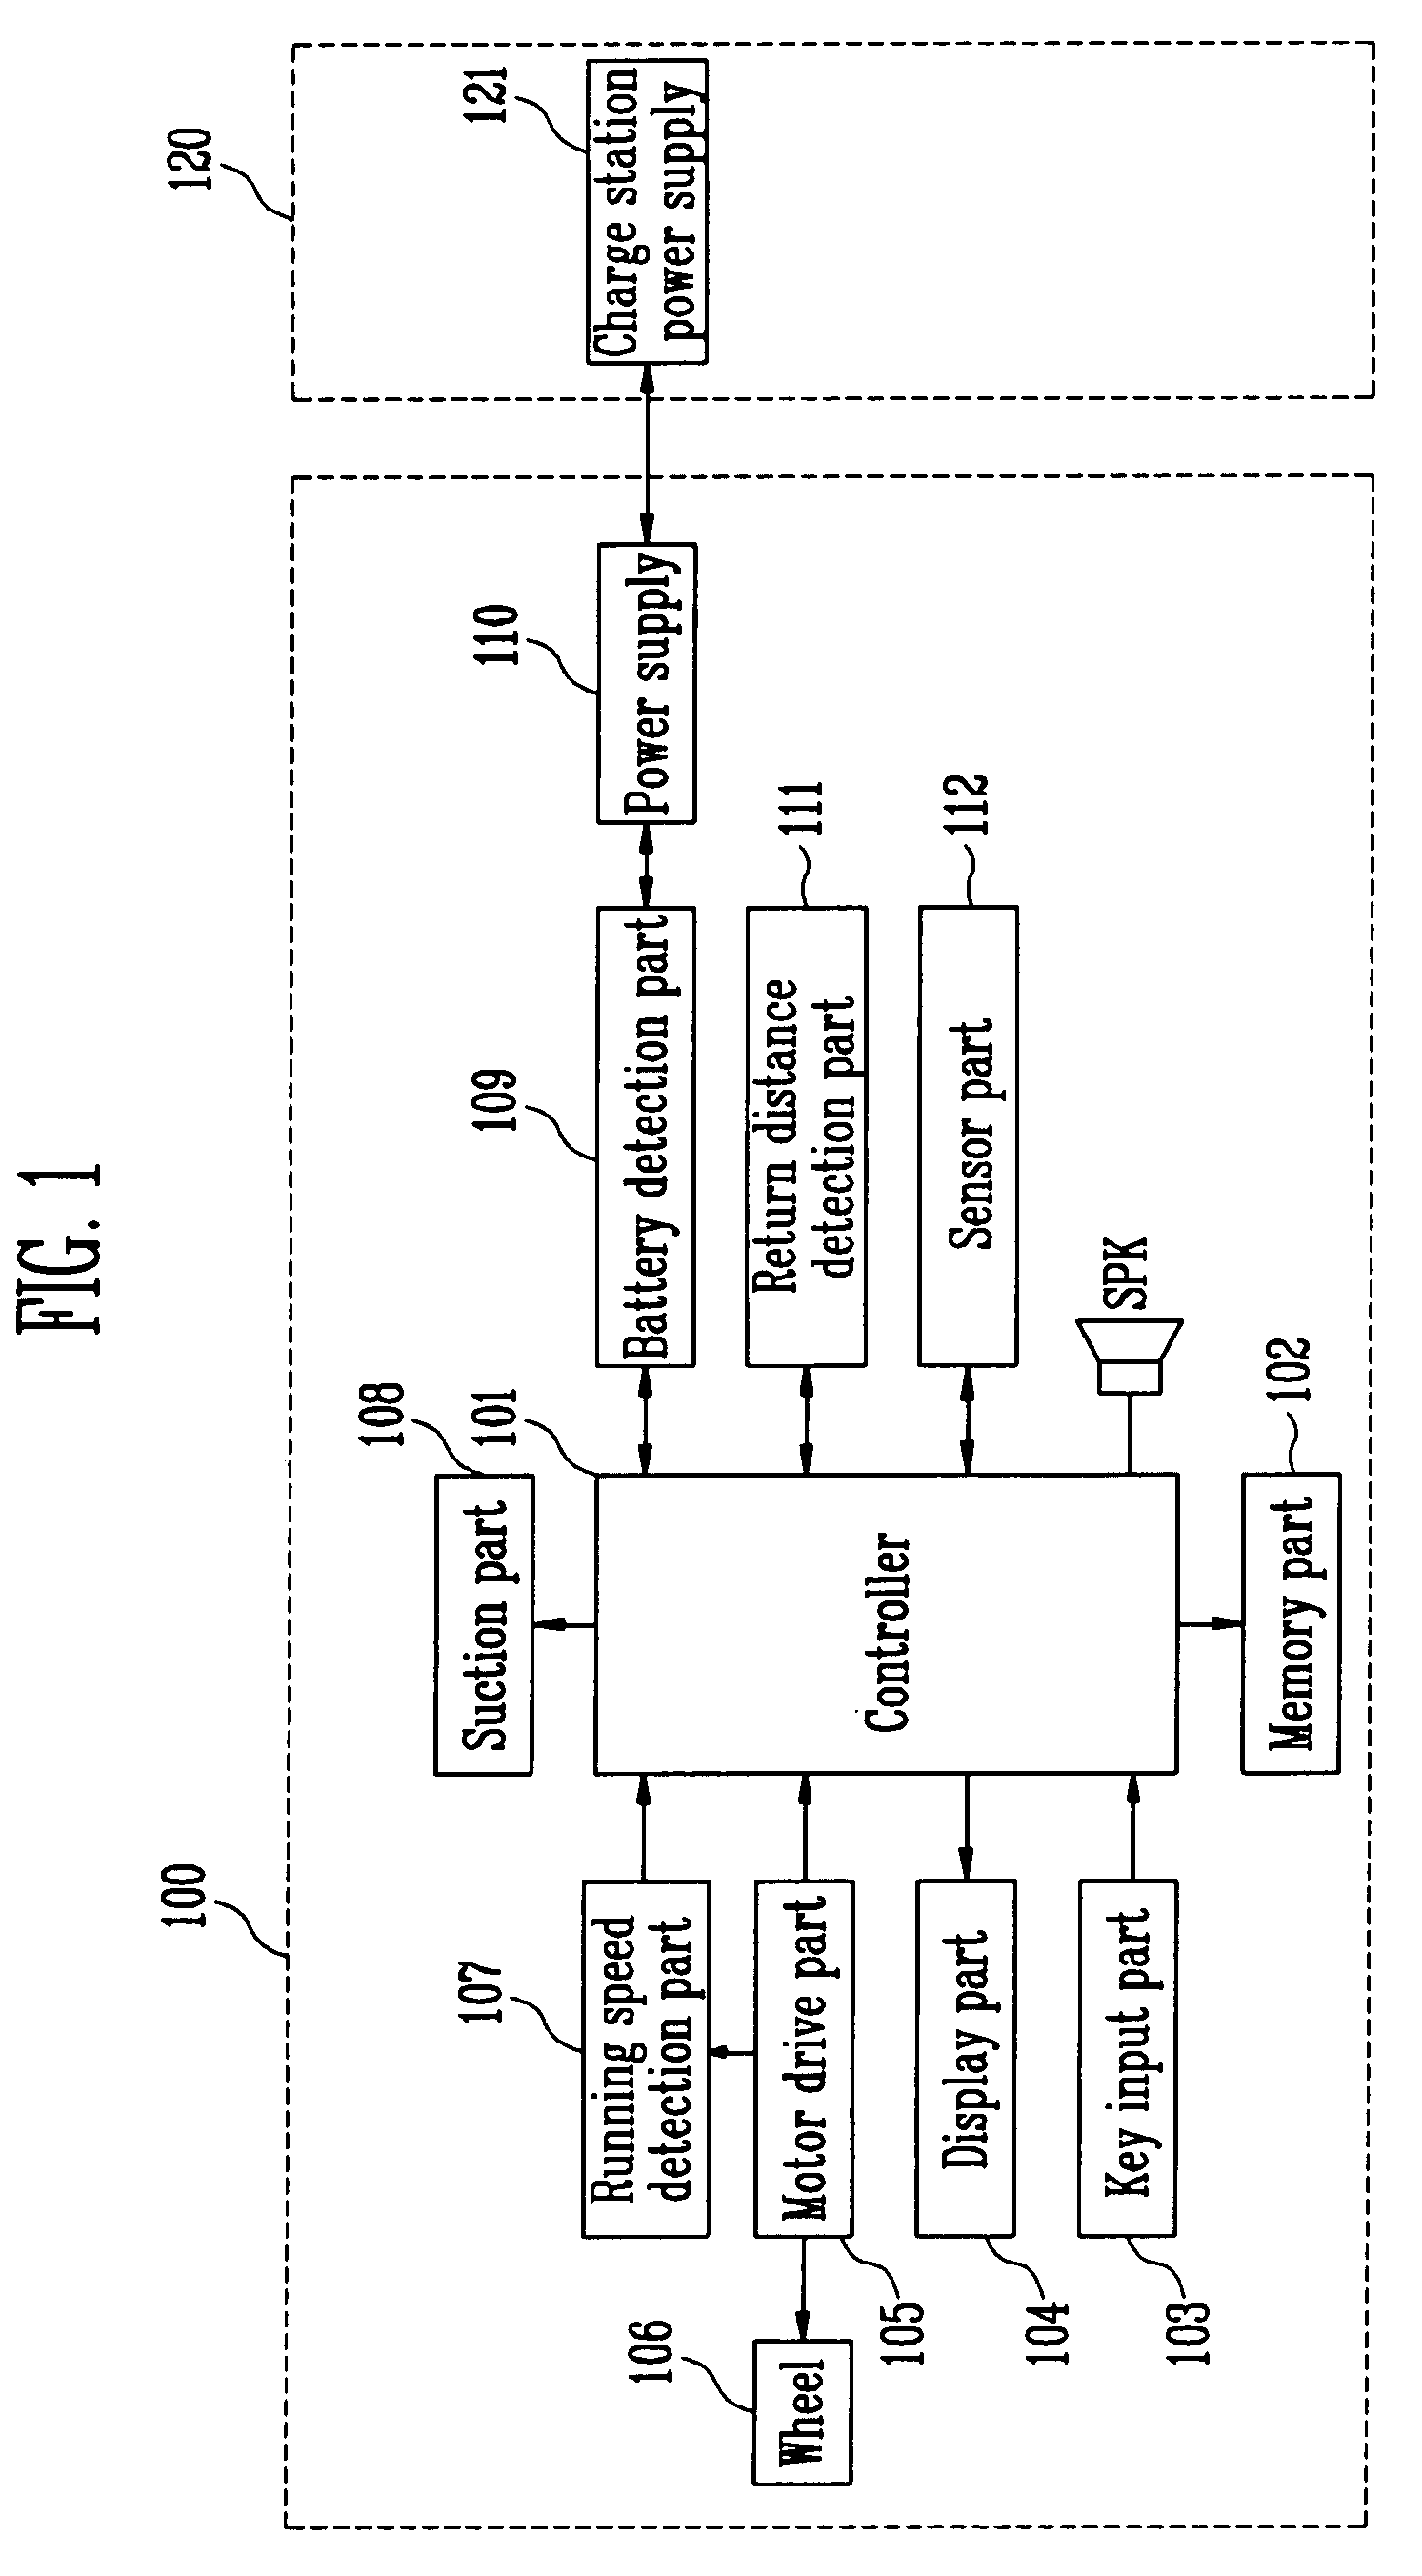 Method and apparatus for returning cleaning robot to charge station